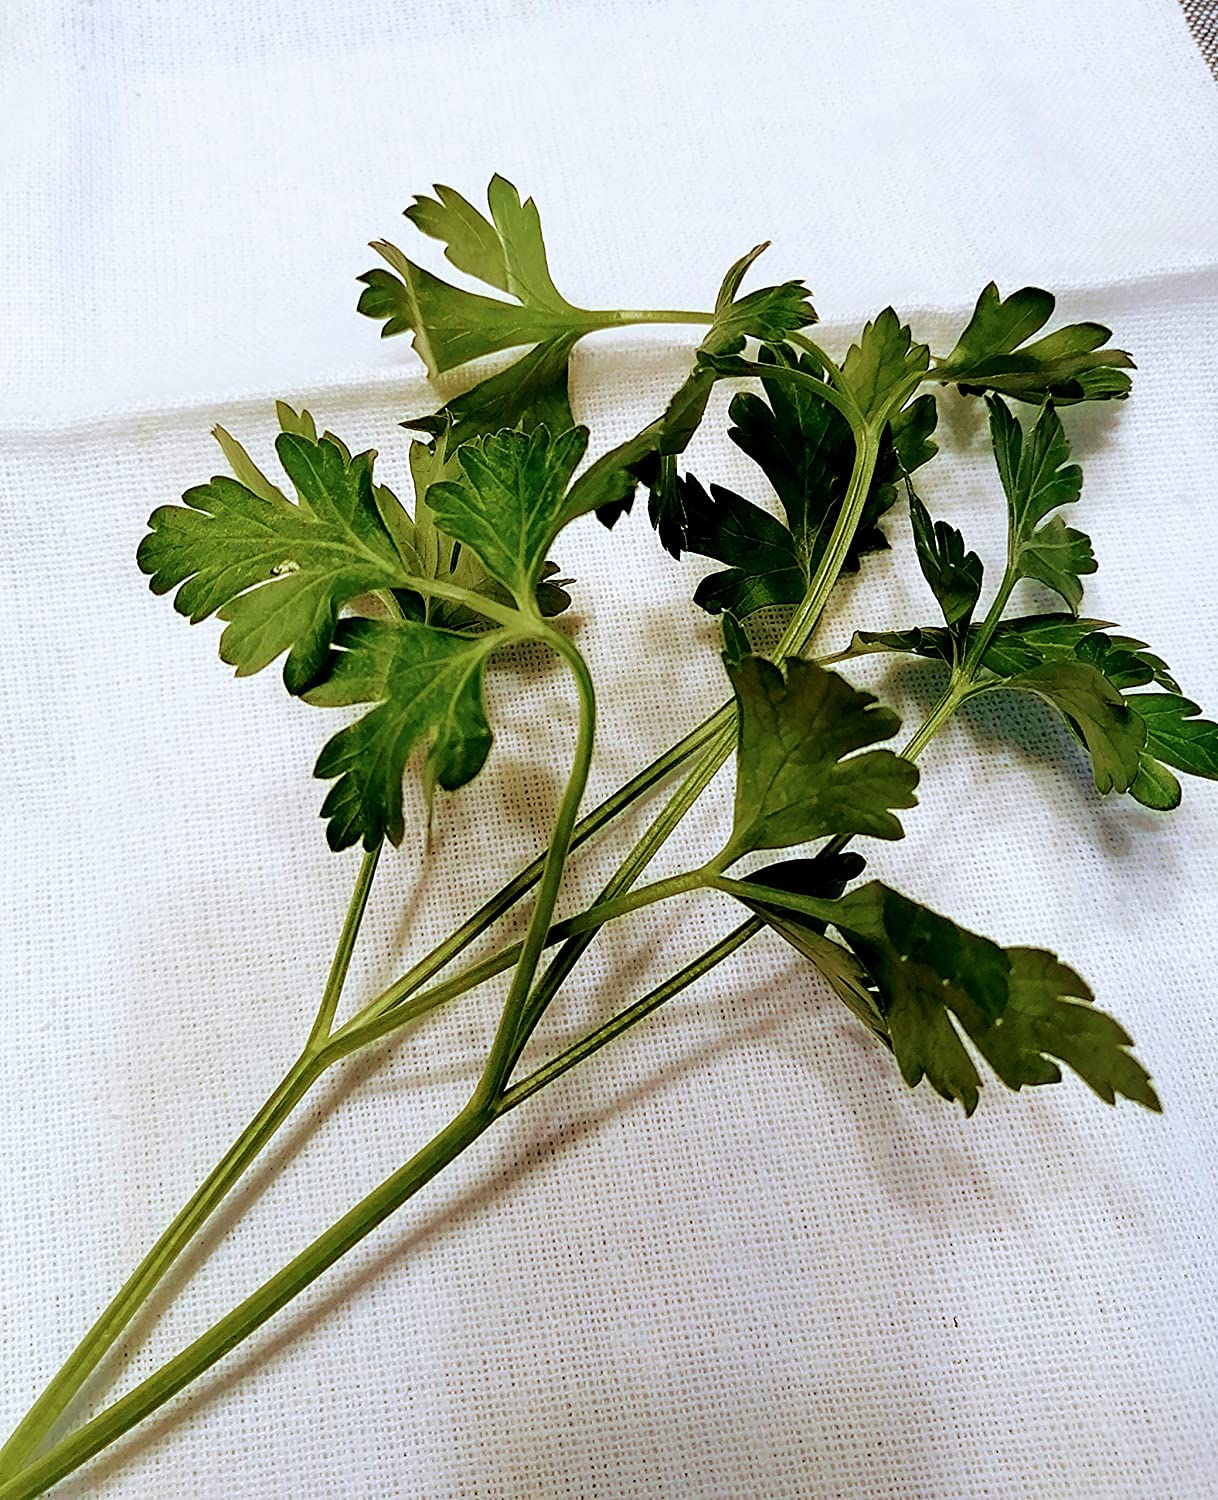 Hundredfold Italian Dark Green Flat Leaf 1000 Parsley Seeds- Petroselinum crispum Non-GMO Fine Herb, Attract Swallowtail Butterflies, Packed & Shipped in Canada